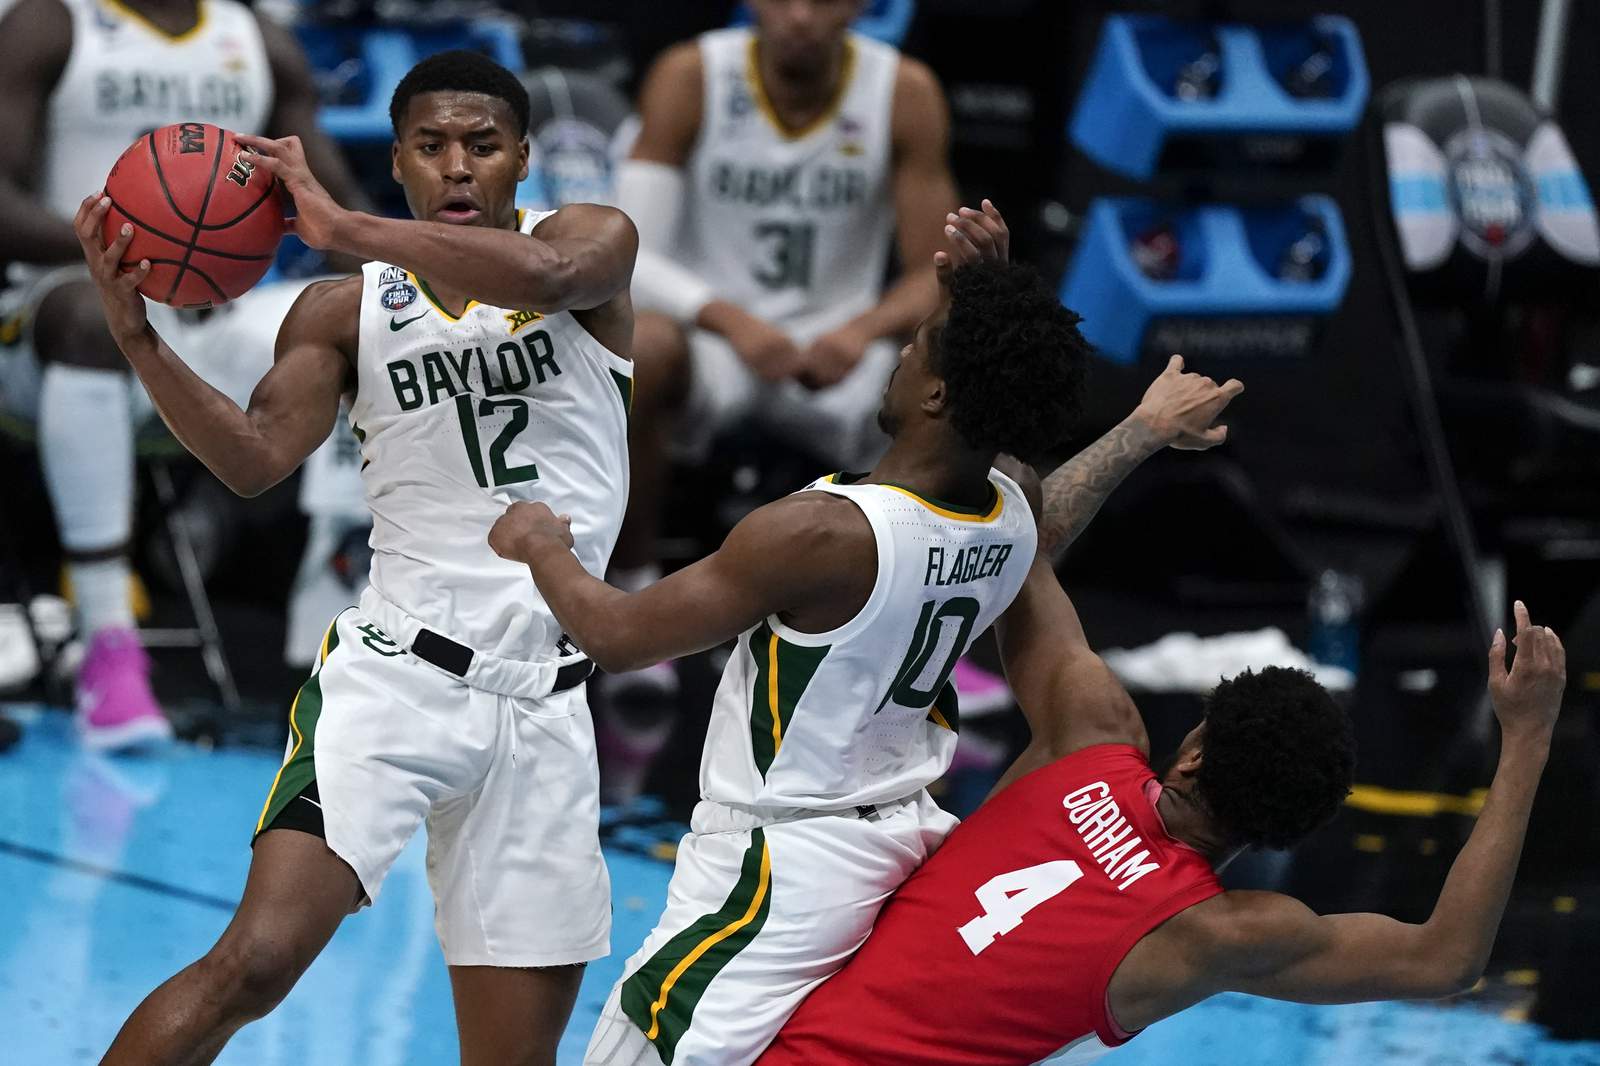 Bearing down: Baylor routs Houston 78-59 to reach title game